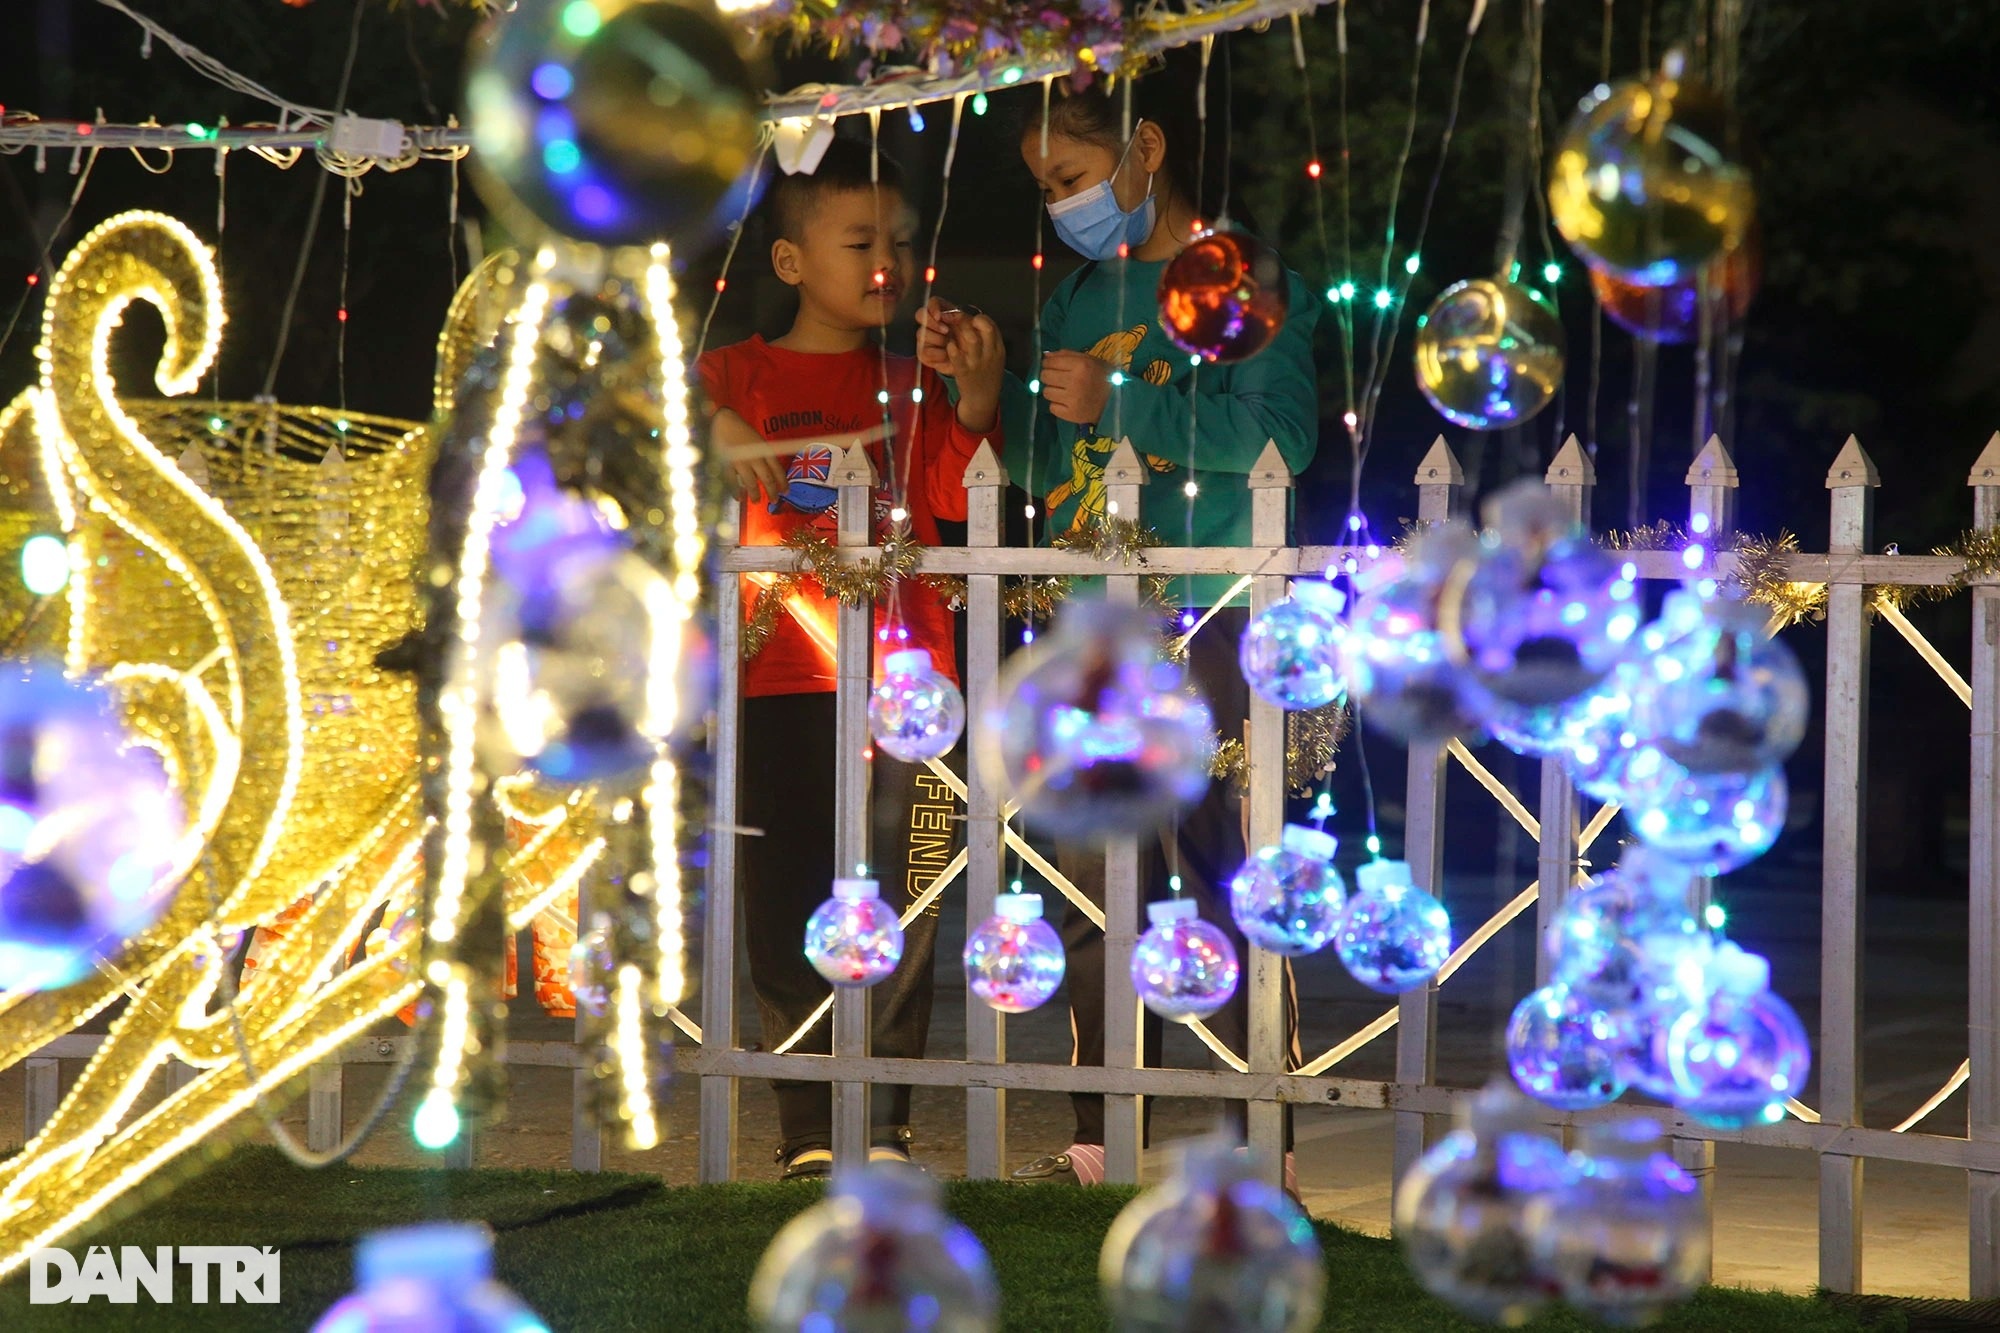 The village of more than 100 years old in Hanoi shimmers like a fairyland on Christmas - 10